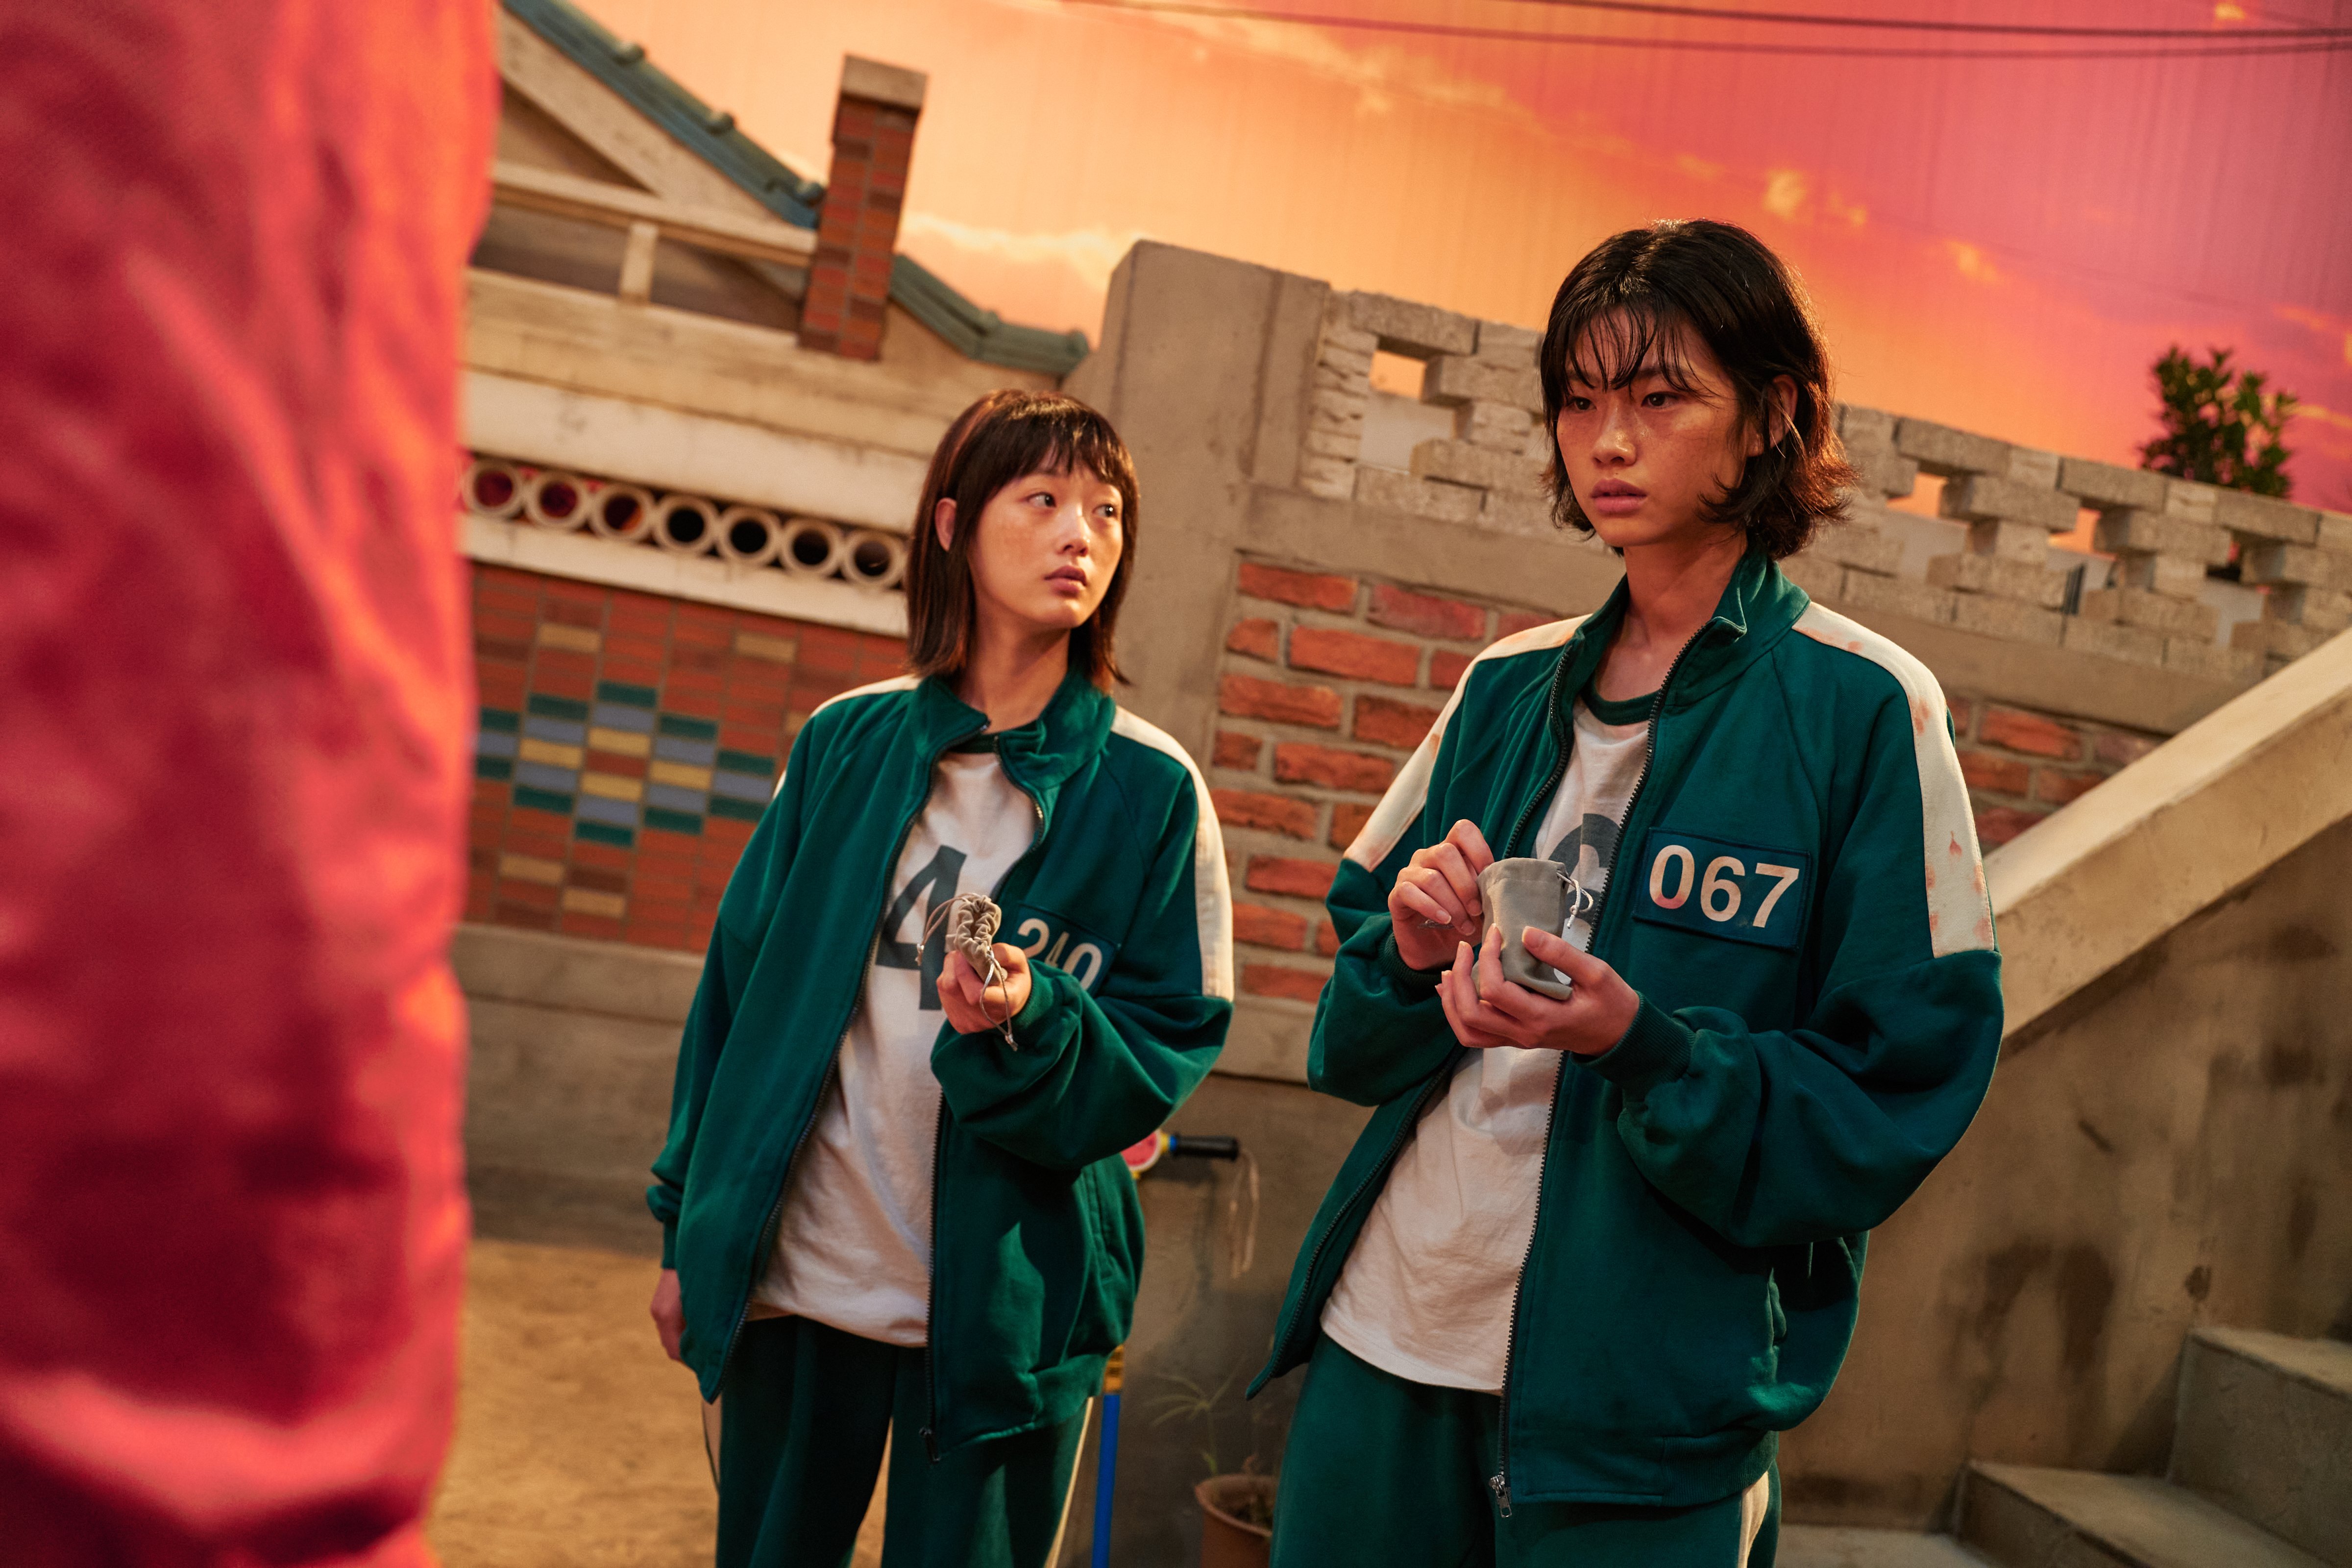 Lee Yoo-mi, left, as Ji-yeong and Jung Ho-yeon, right, as Kang Sae-byeok in Squid Game (Courtesy Netflix)